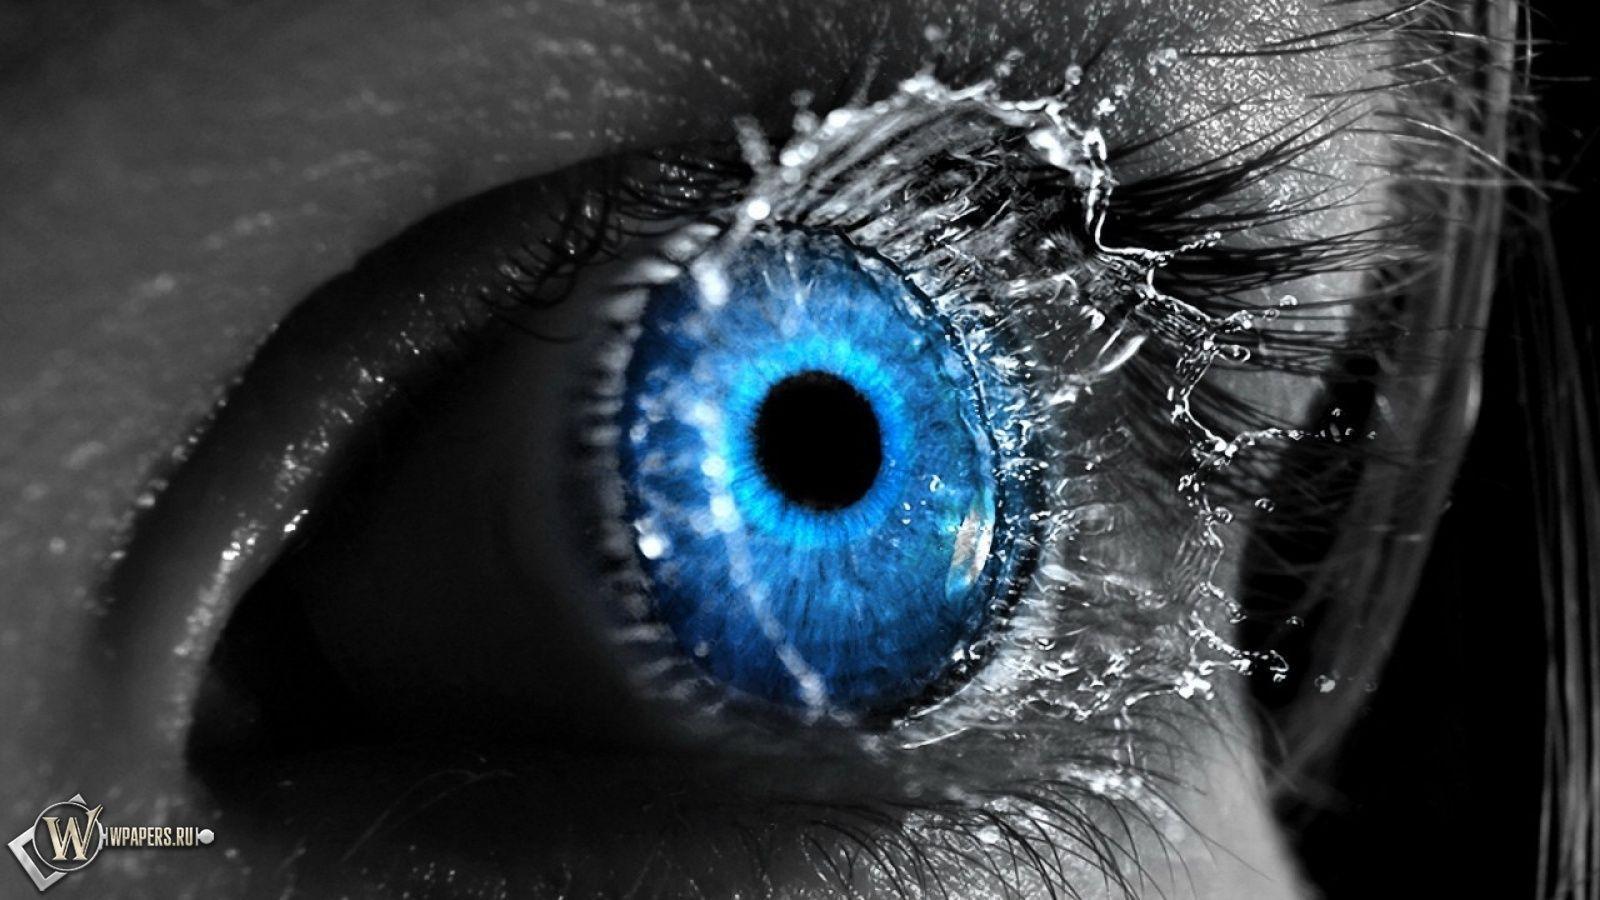 Astonishing Abstract Blue Eyes Wallpapers 1600x900PX ~ Hd Blue Eyes